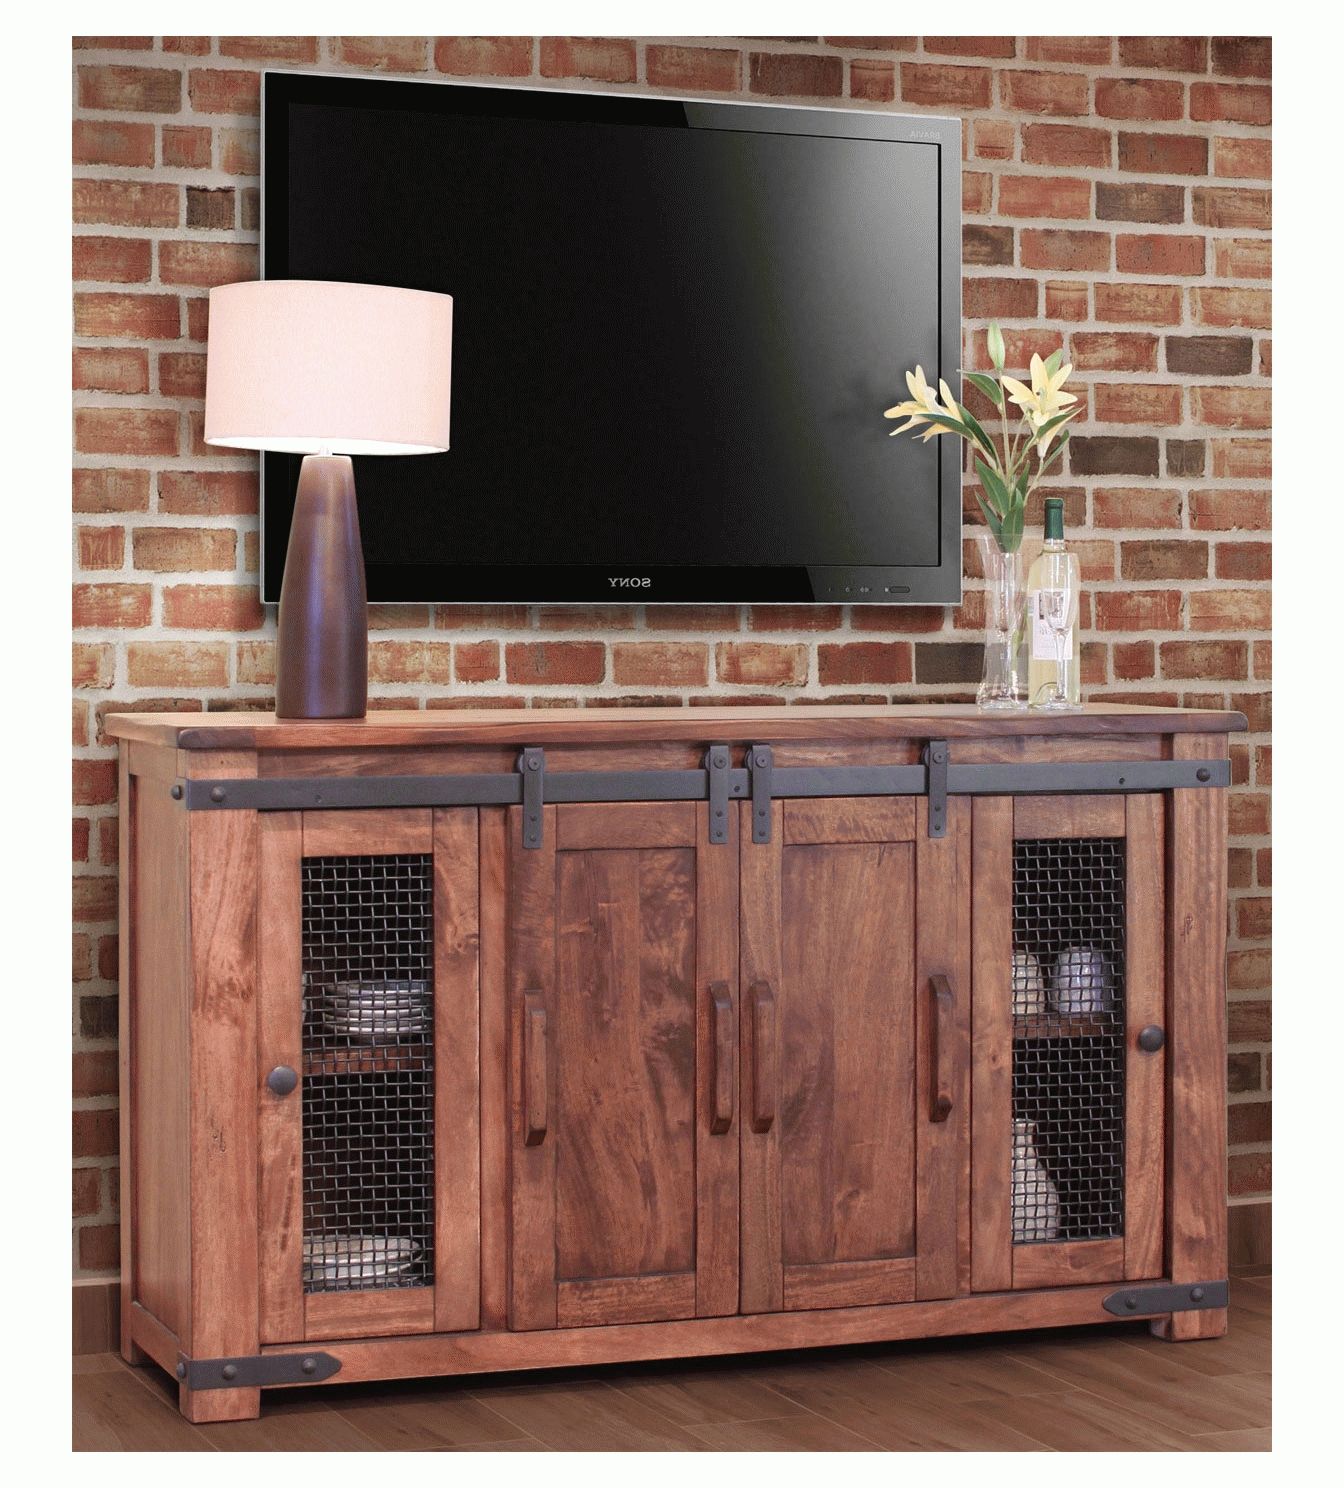 Rustic Barn Door Tv Stand, Barn Door Tv Stand, Barn Door Tv Console With Regard To Tv Stands Cabinets (View 3 of 15)